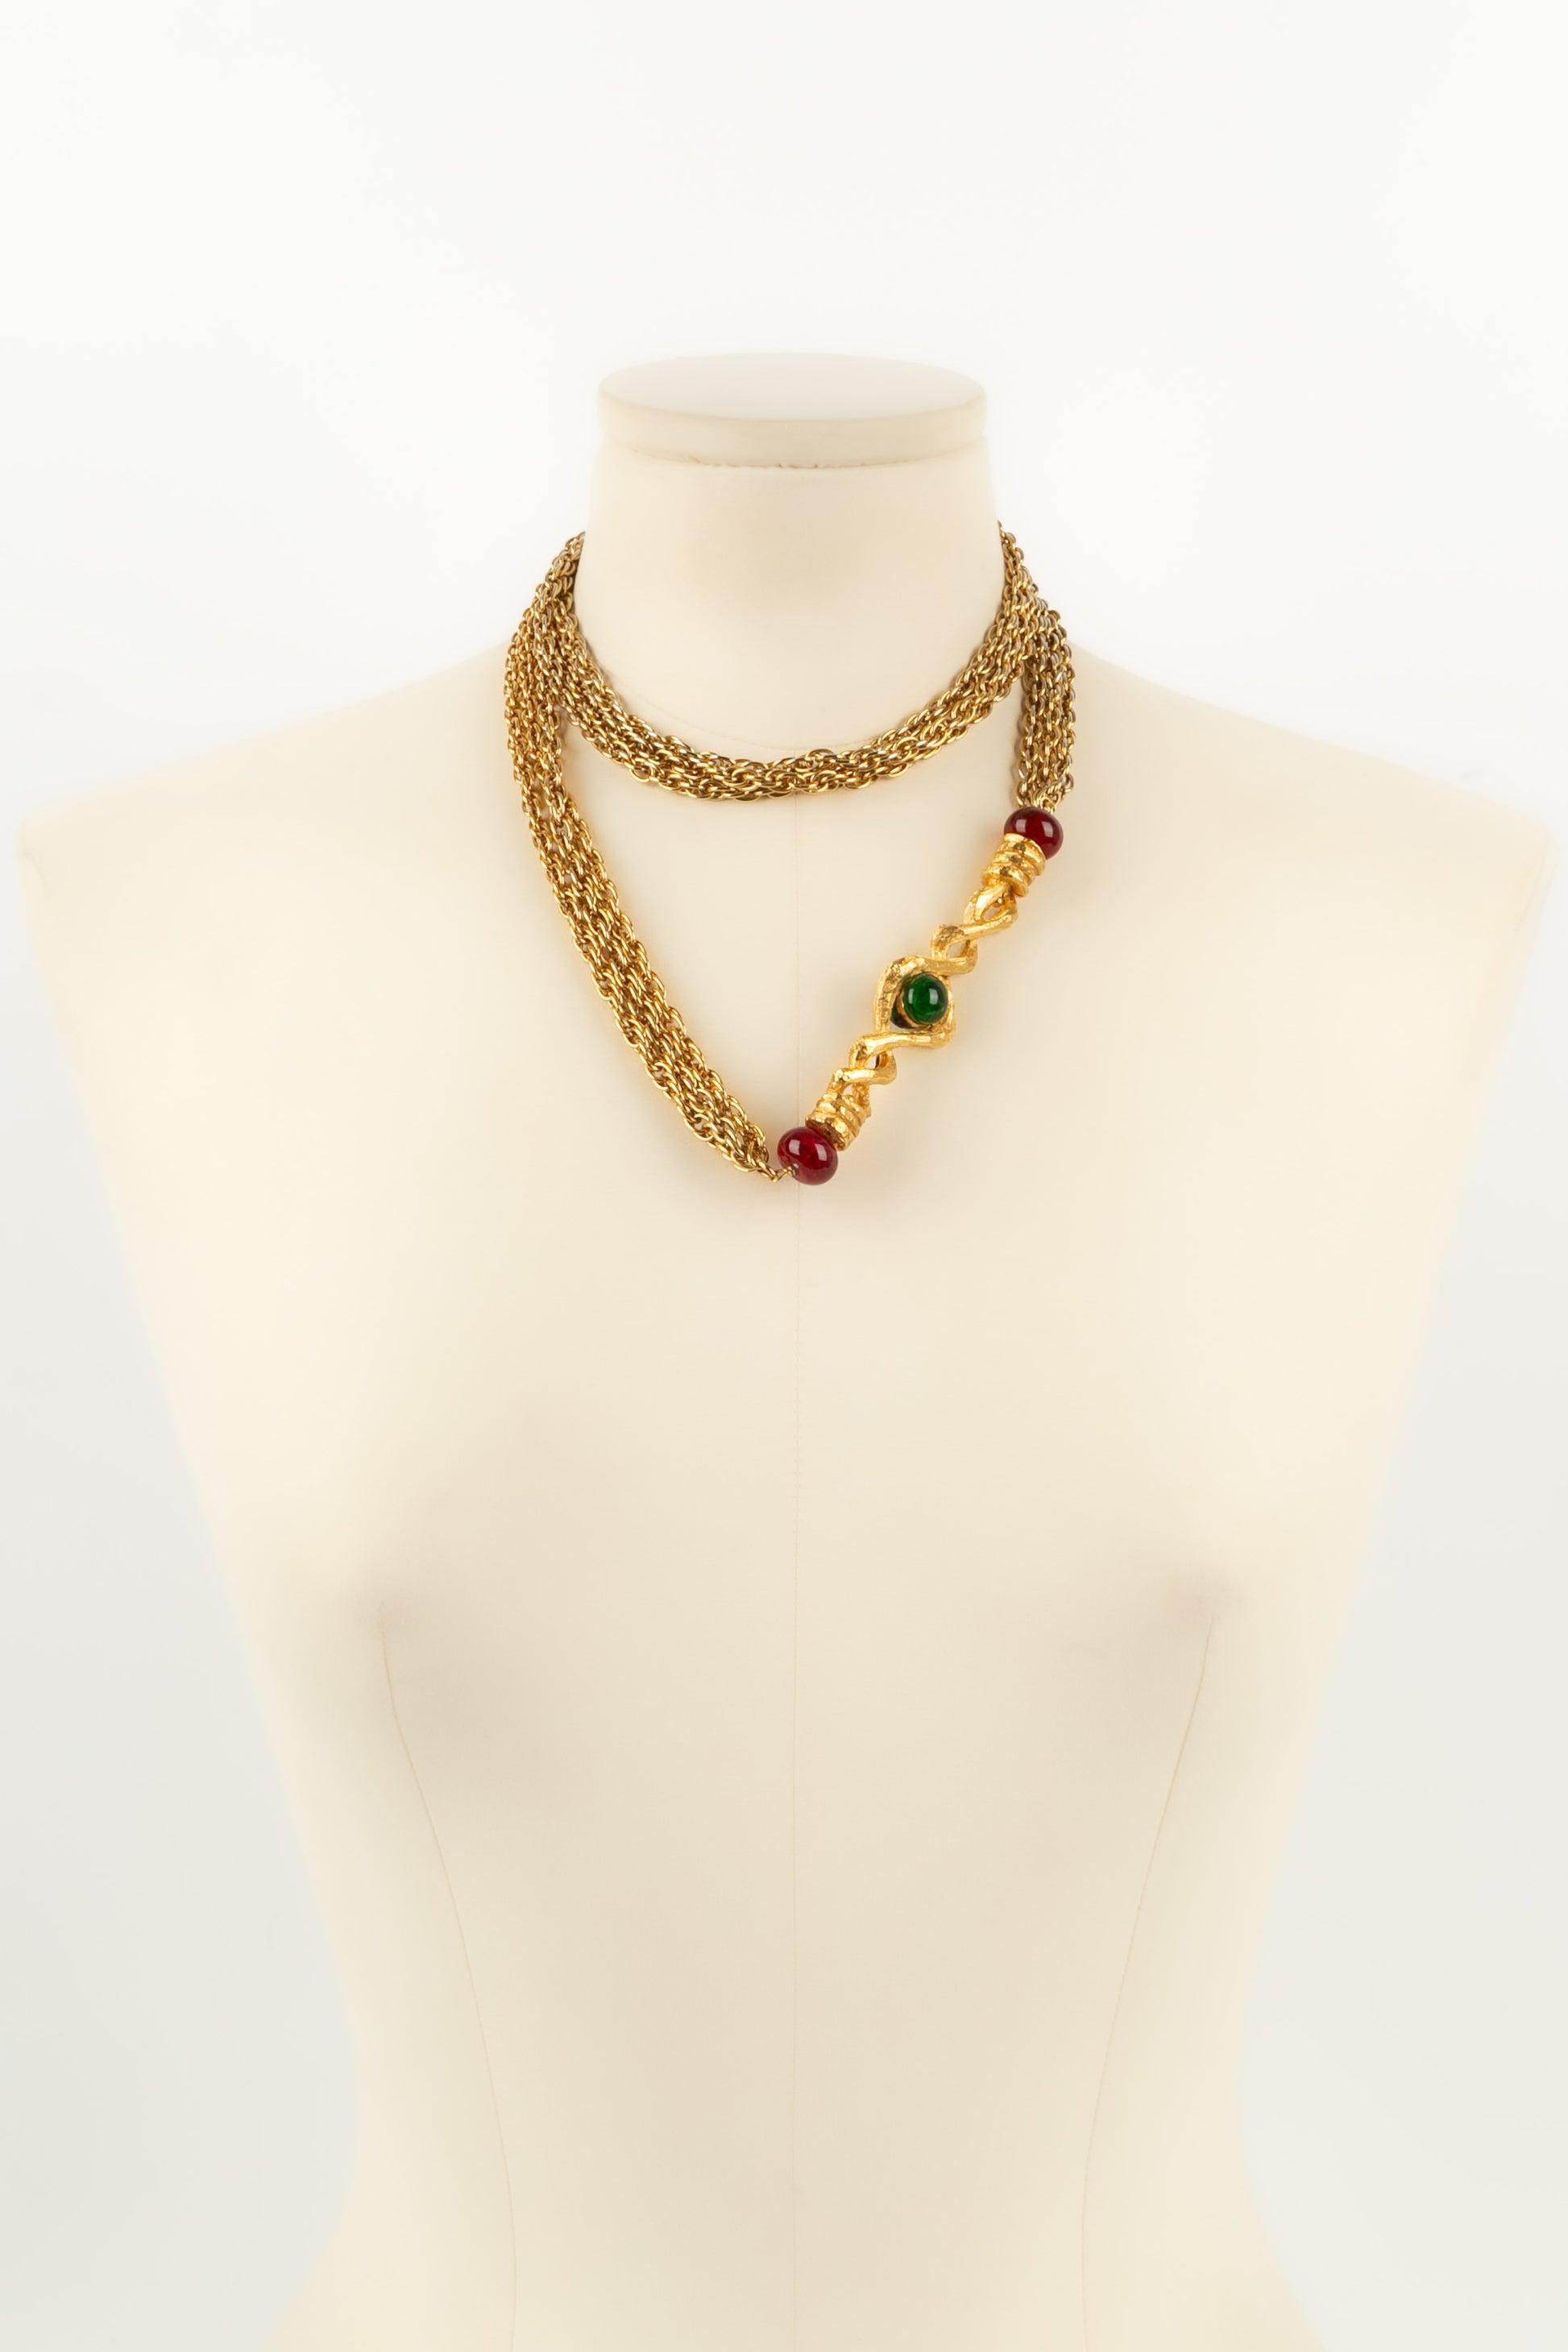 Chanel Necklace in Gold-Plated Metal and Colored Glass Pearls For Sale 1